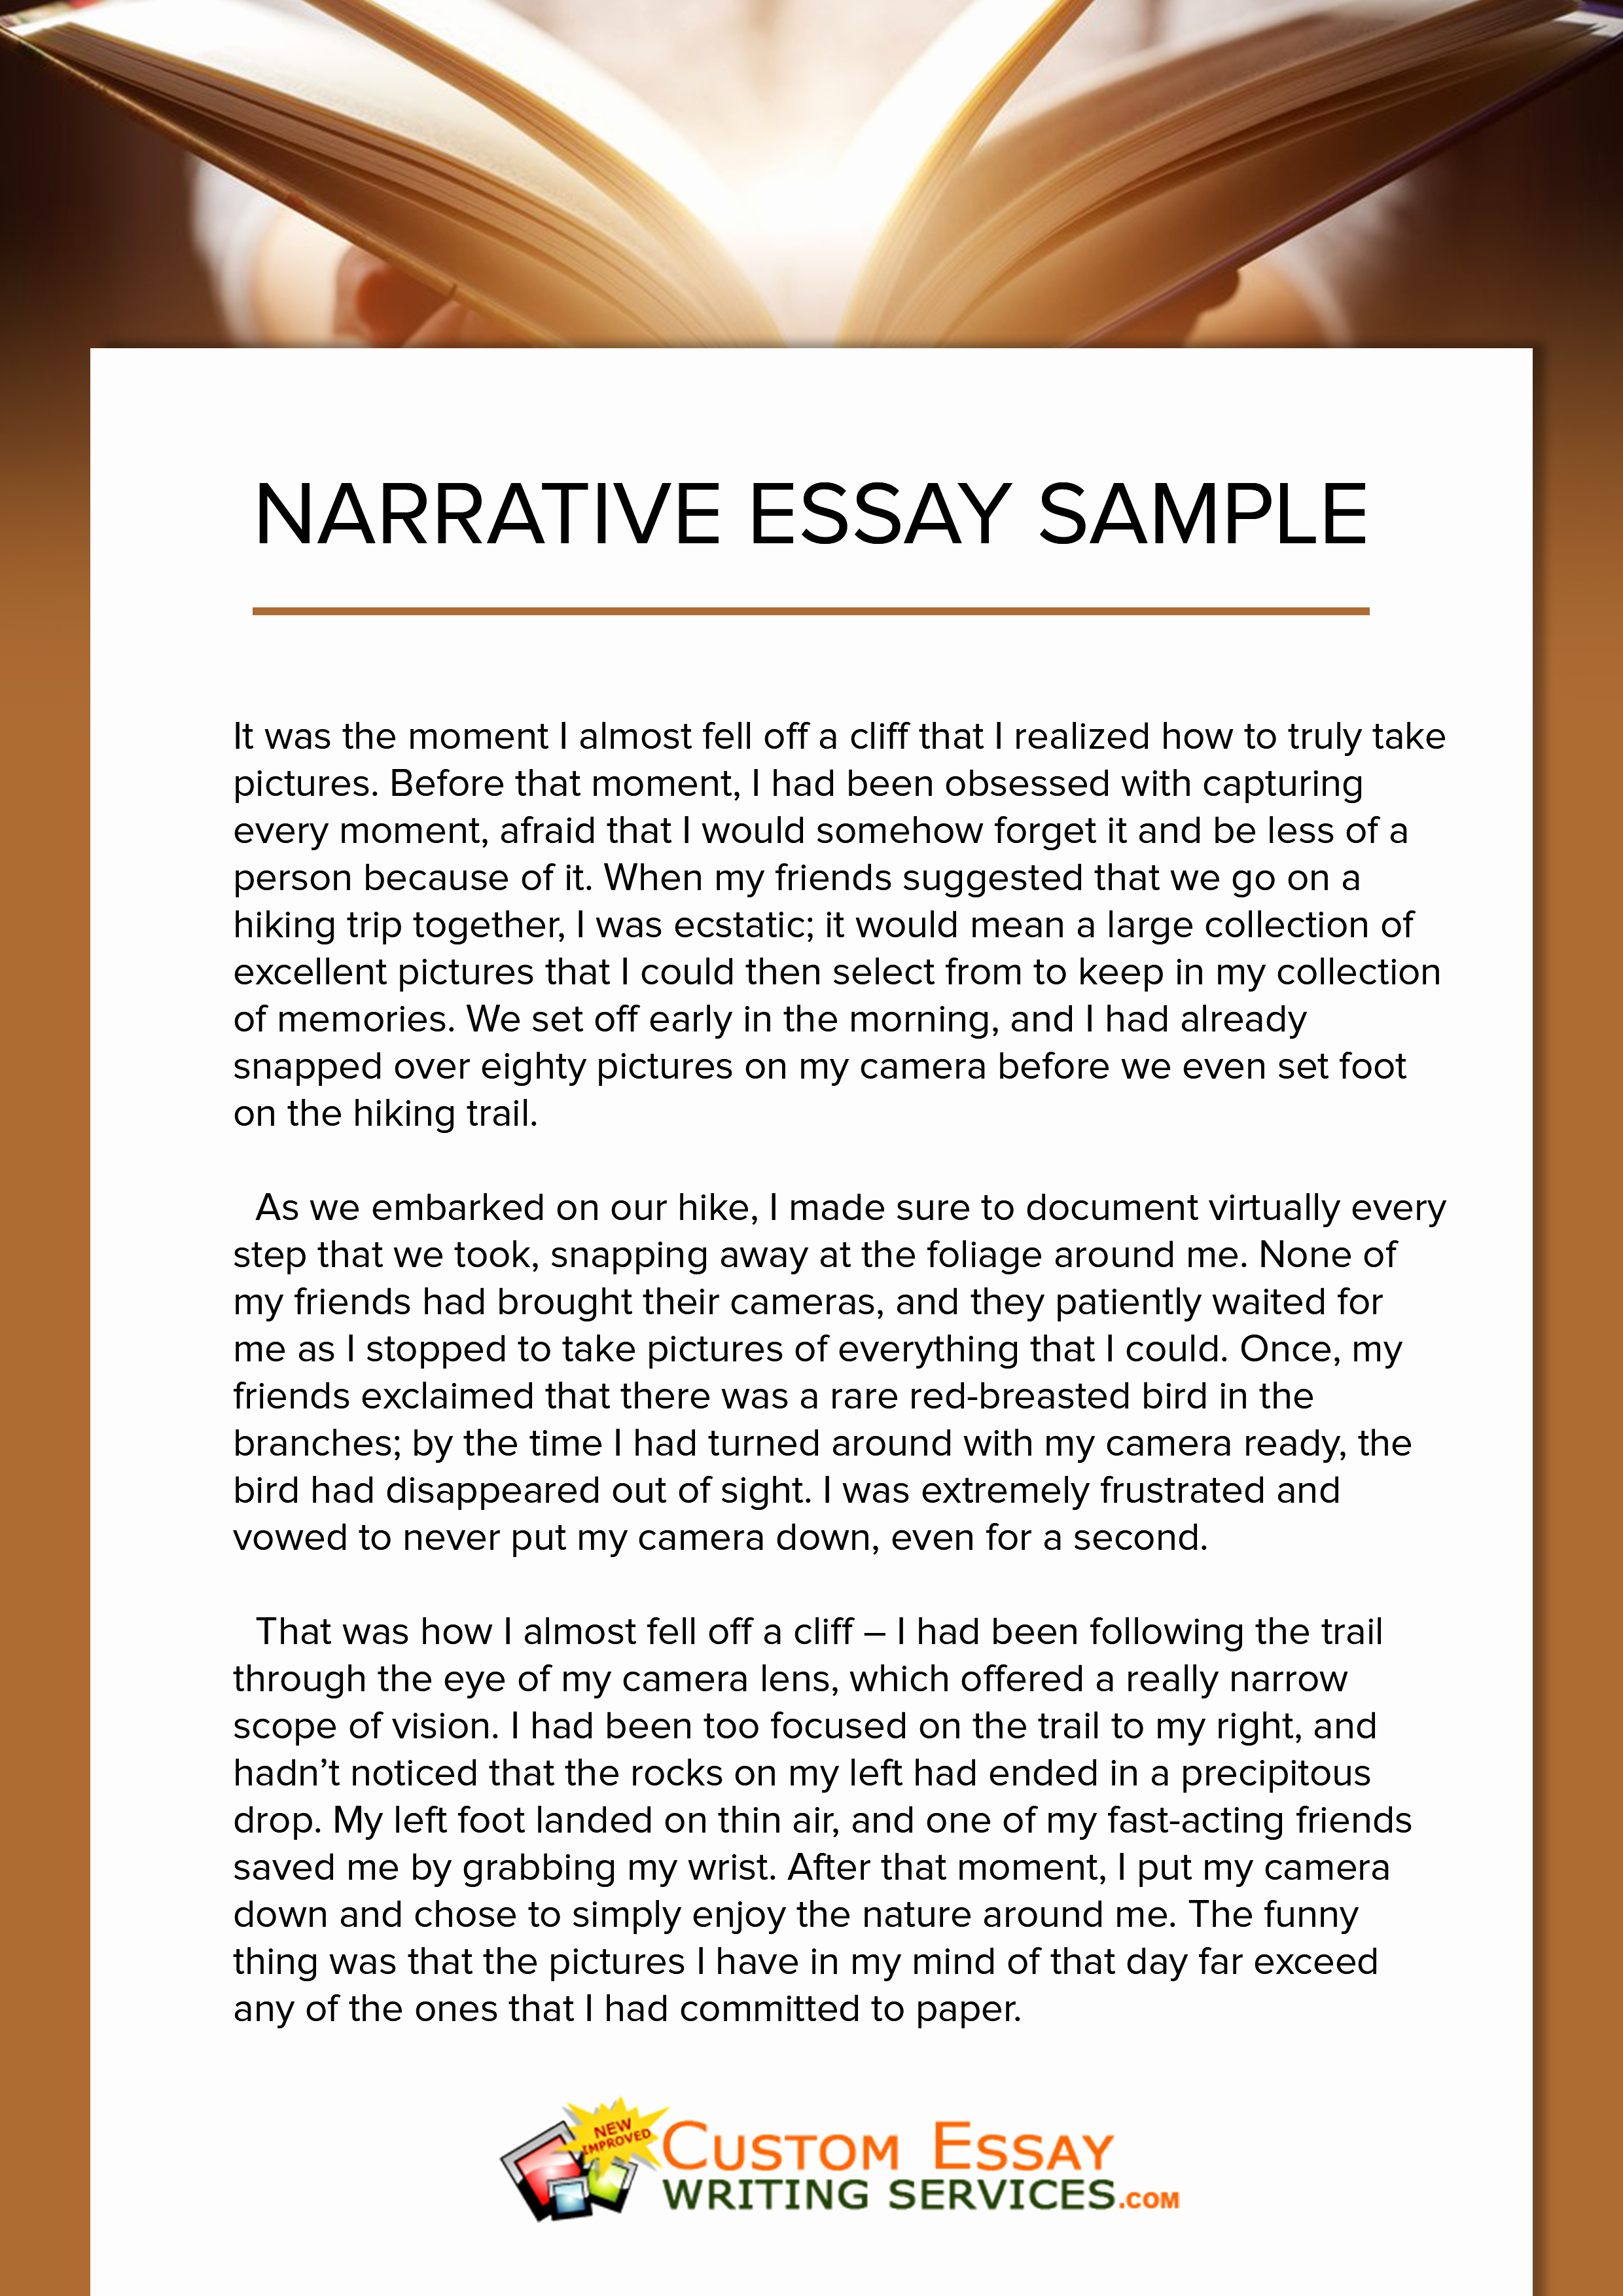 Role of technology essay